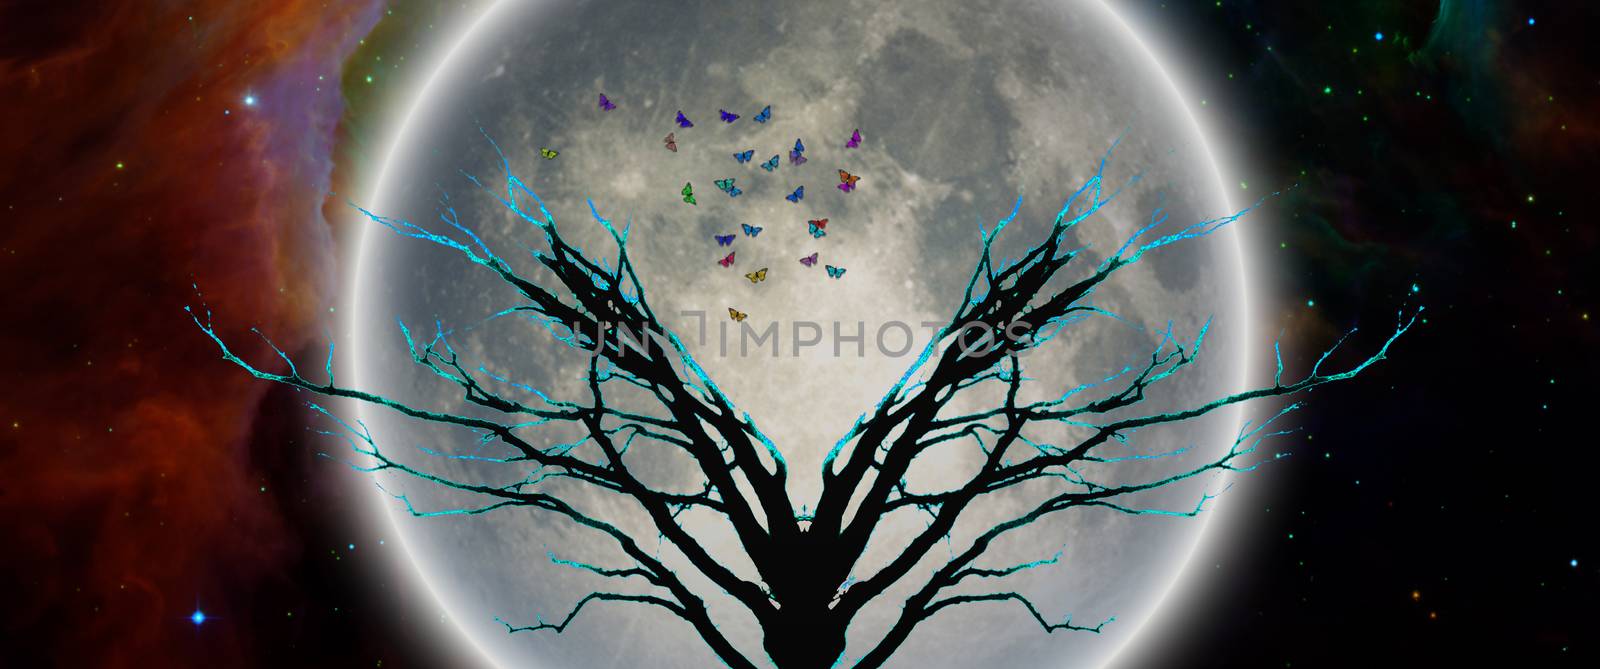 Mystic tree in moonlight. Butterflies symbolizes souls or hope